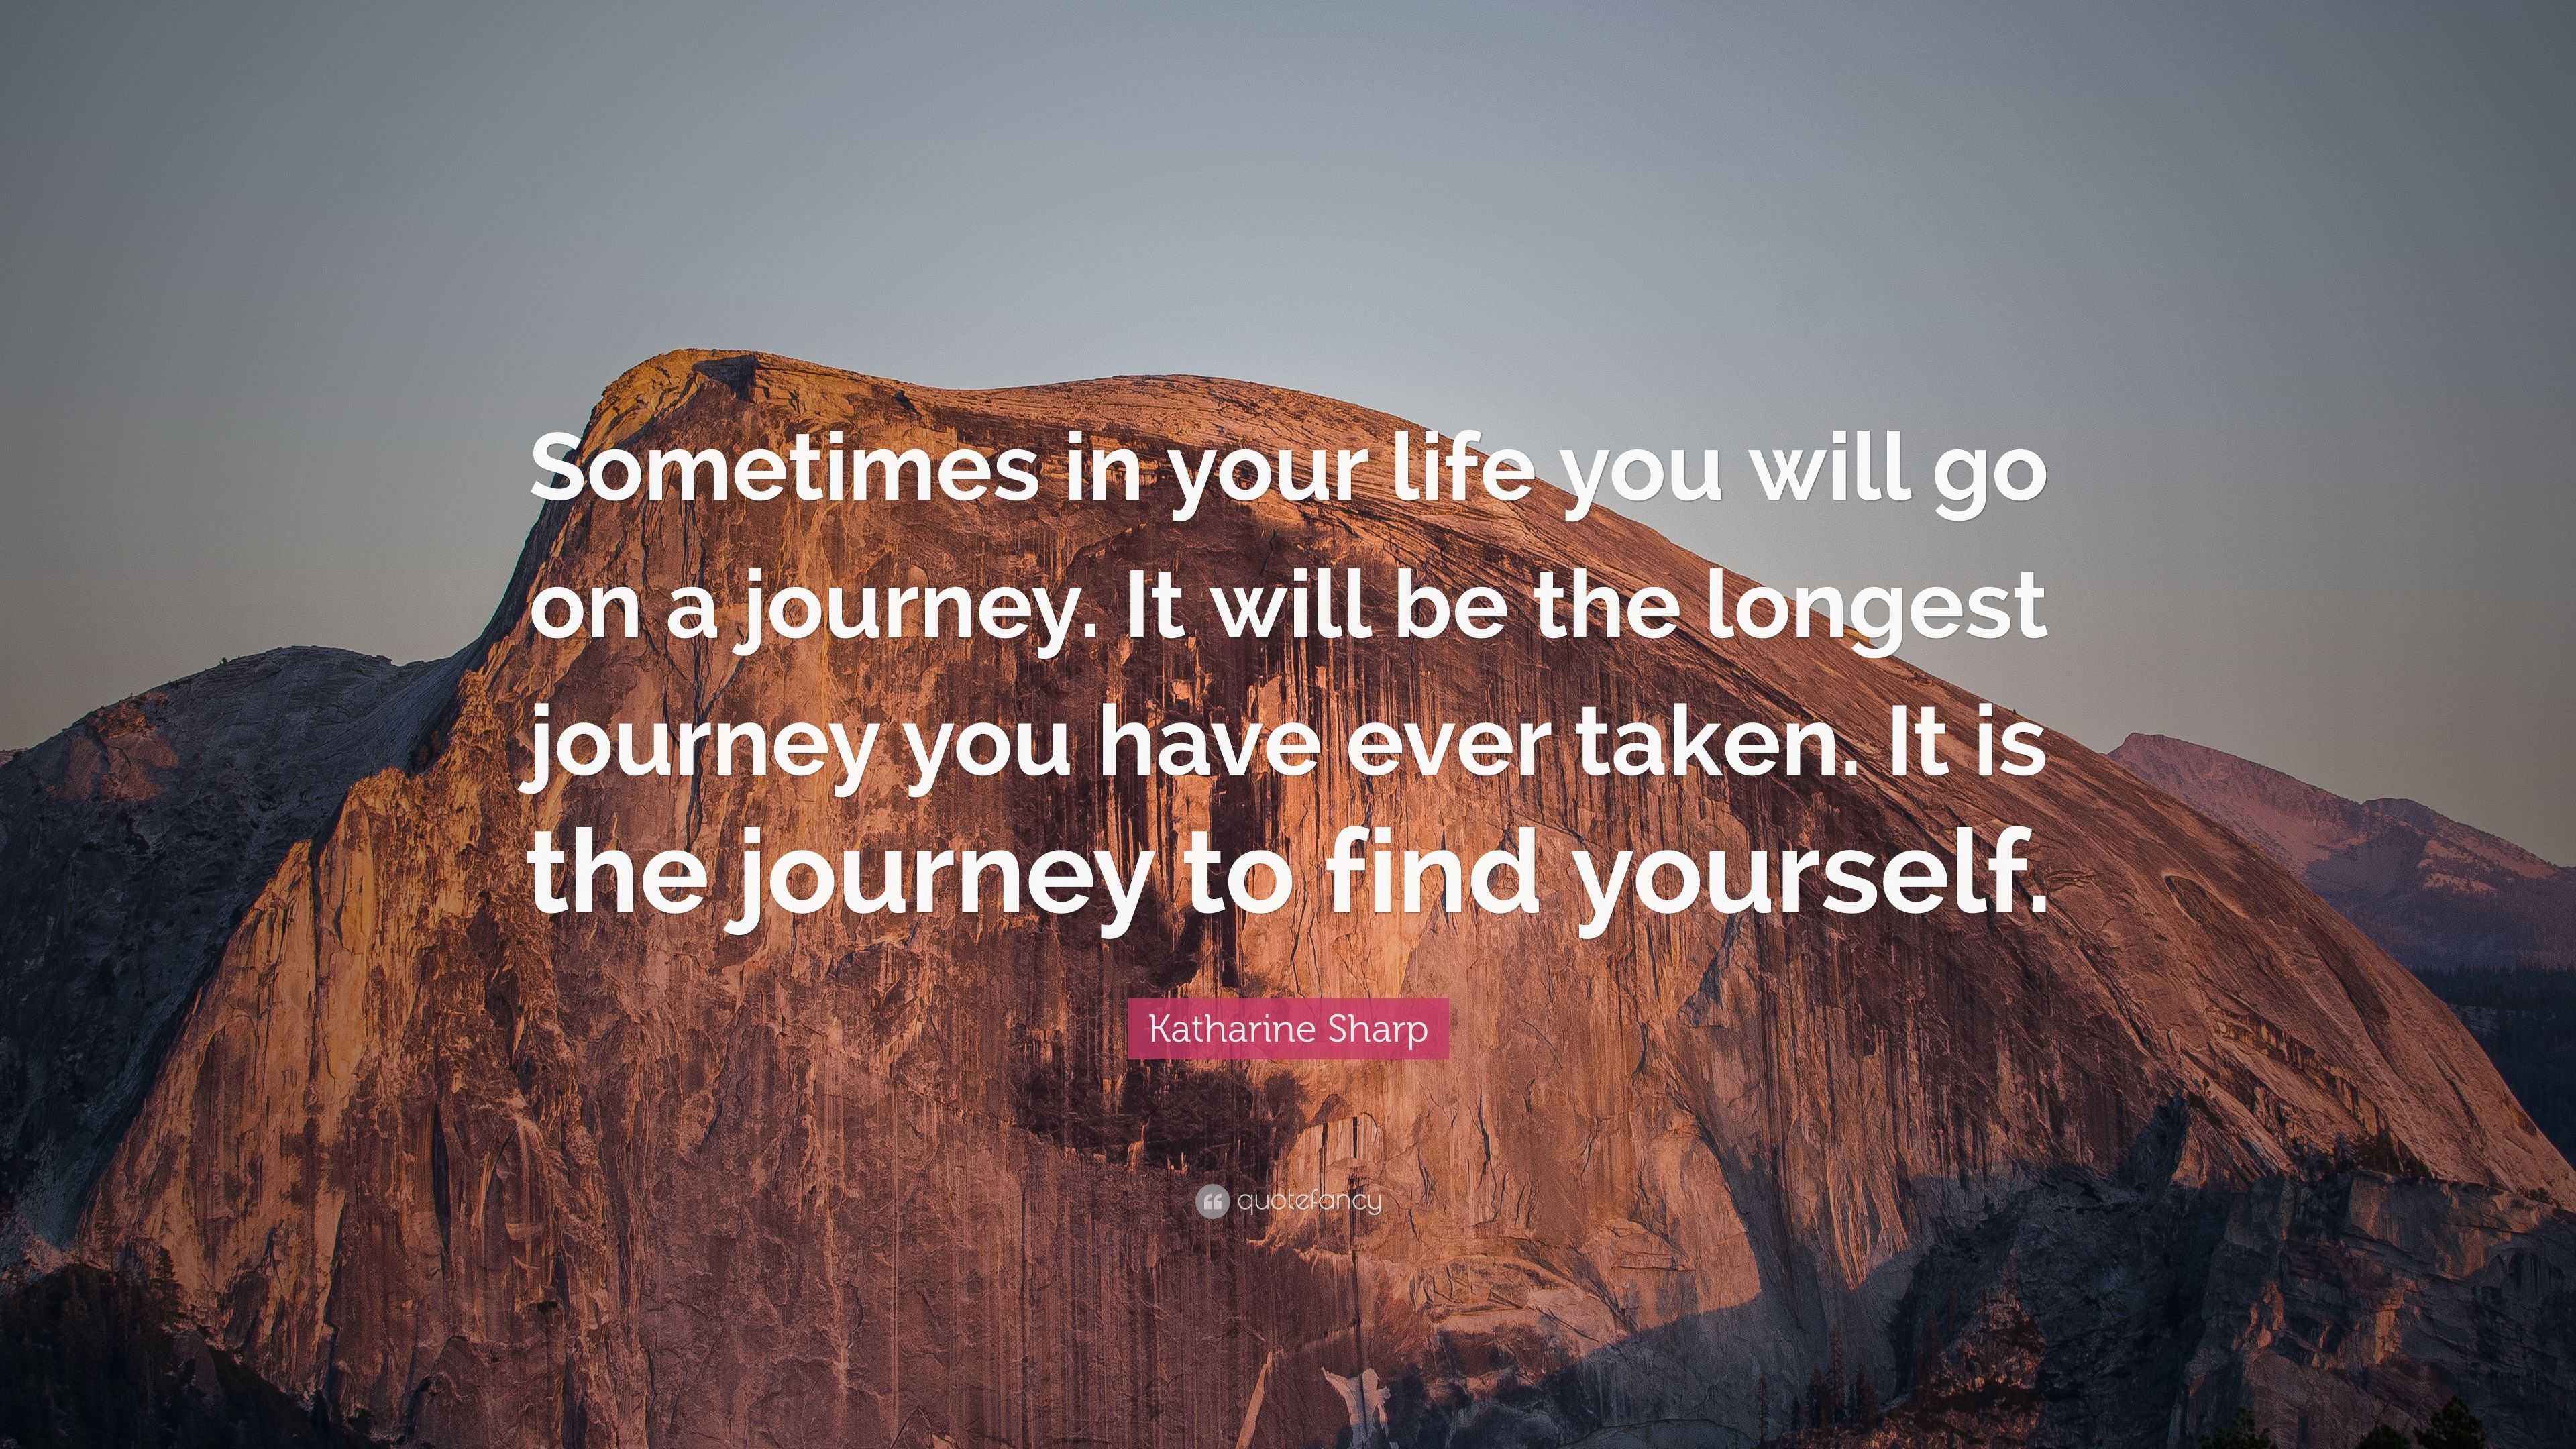 Katharine Sharp Quote: “Sometimes in your life you will go on a journey ...